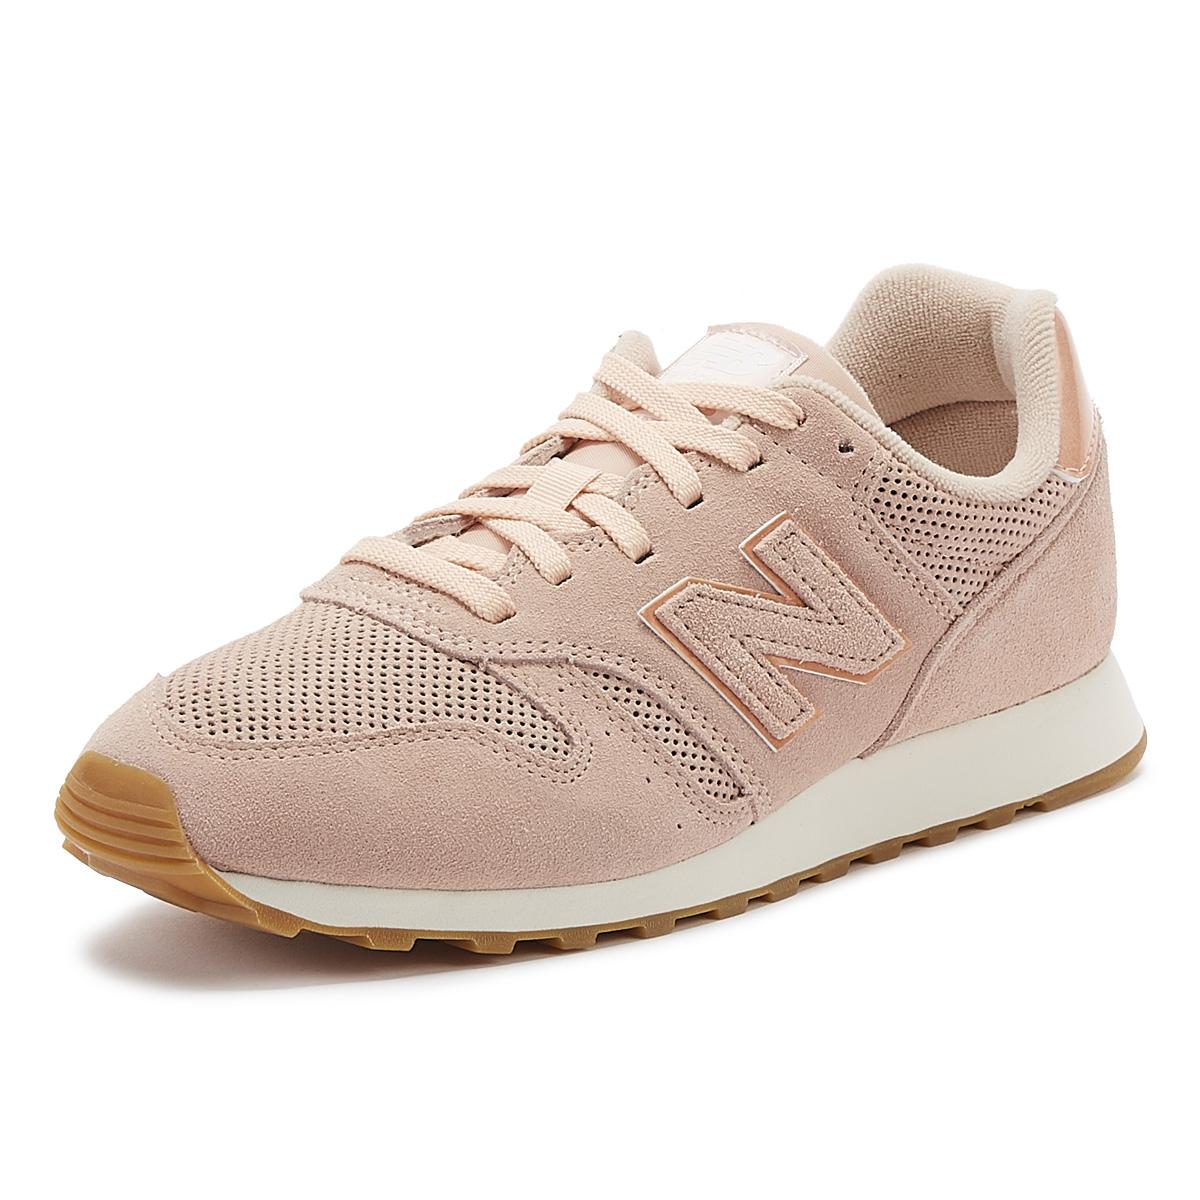 New Balance 373 Womens Pink Suede Trainers - Lyst